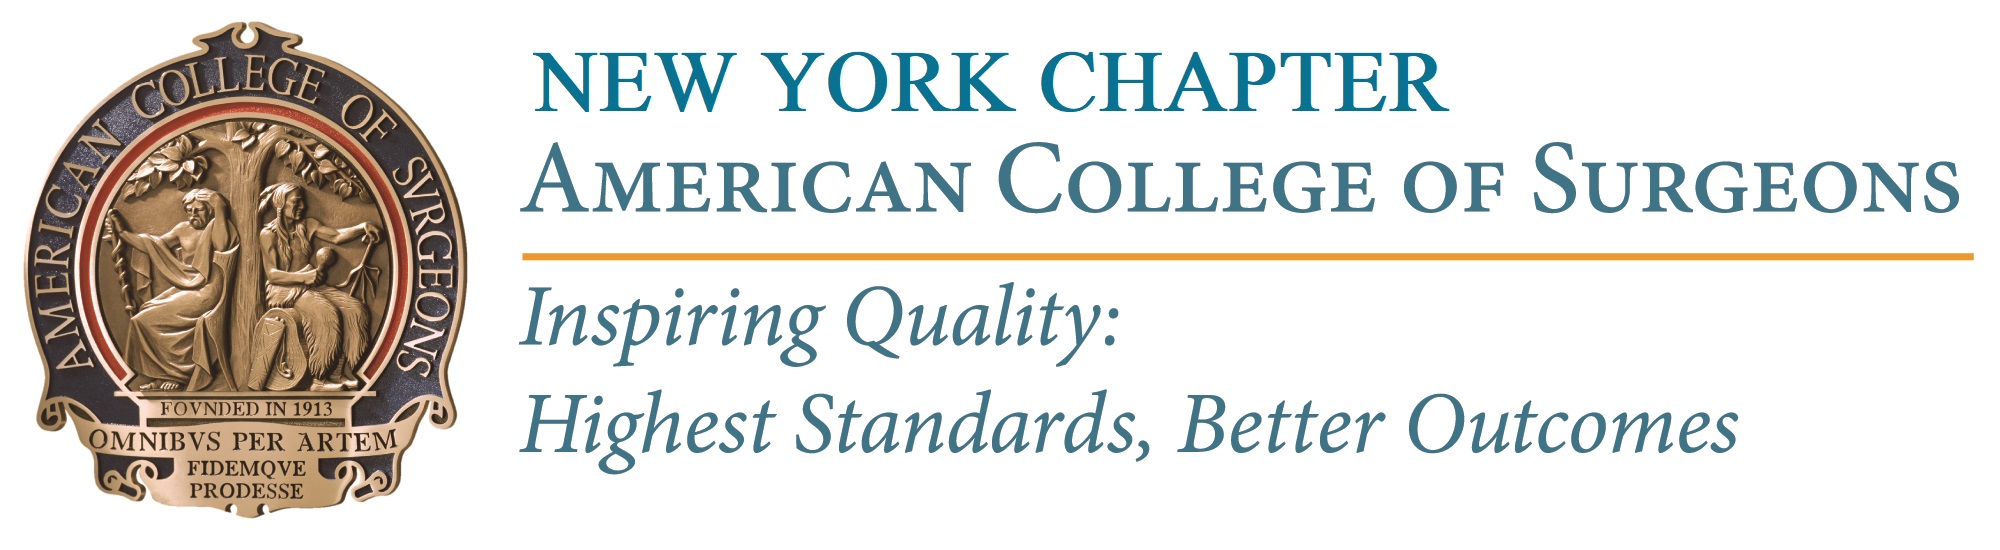 The New York Chapter of the American College of Surgeons